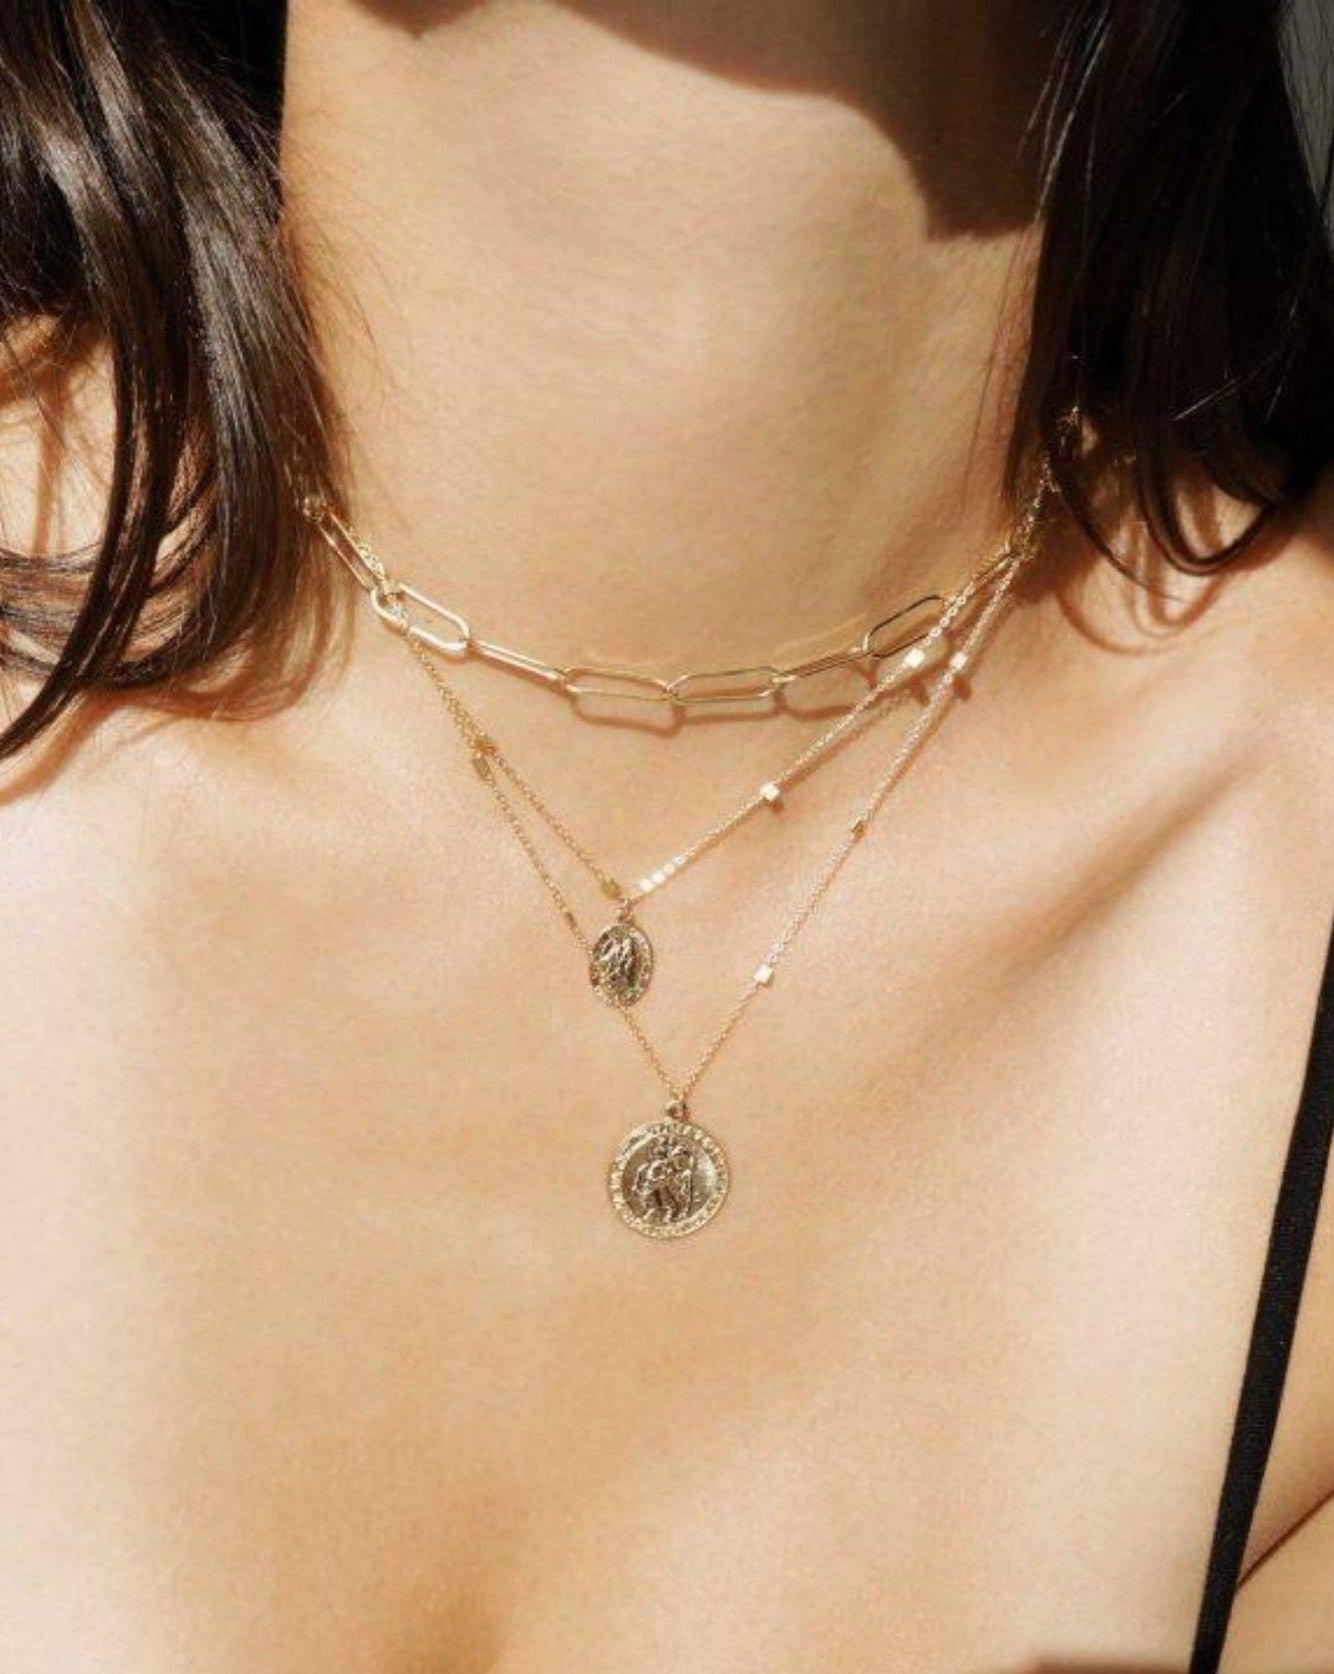 San Cris Oval Necklace by KOZAKH. A 16 to 18 inch adjustable length necklace, crafted in 14K Gold Filled, featuring a 16mm Saint Christopher oval Medallion.